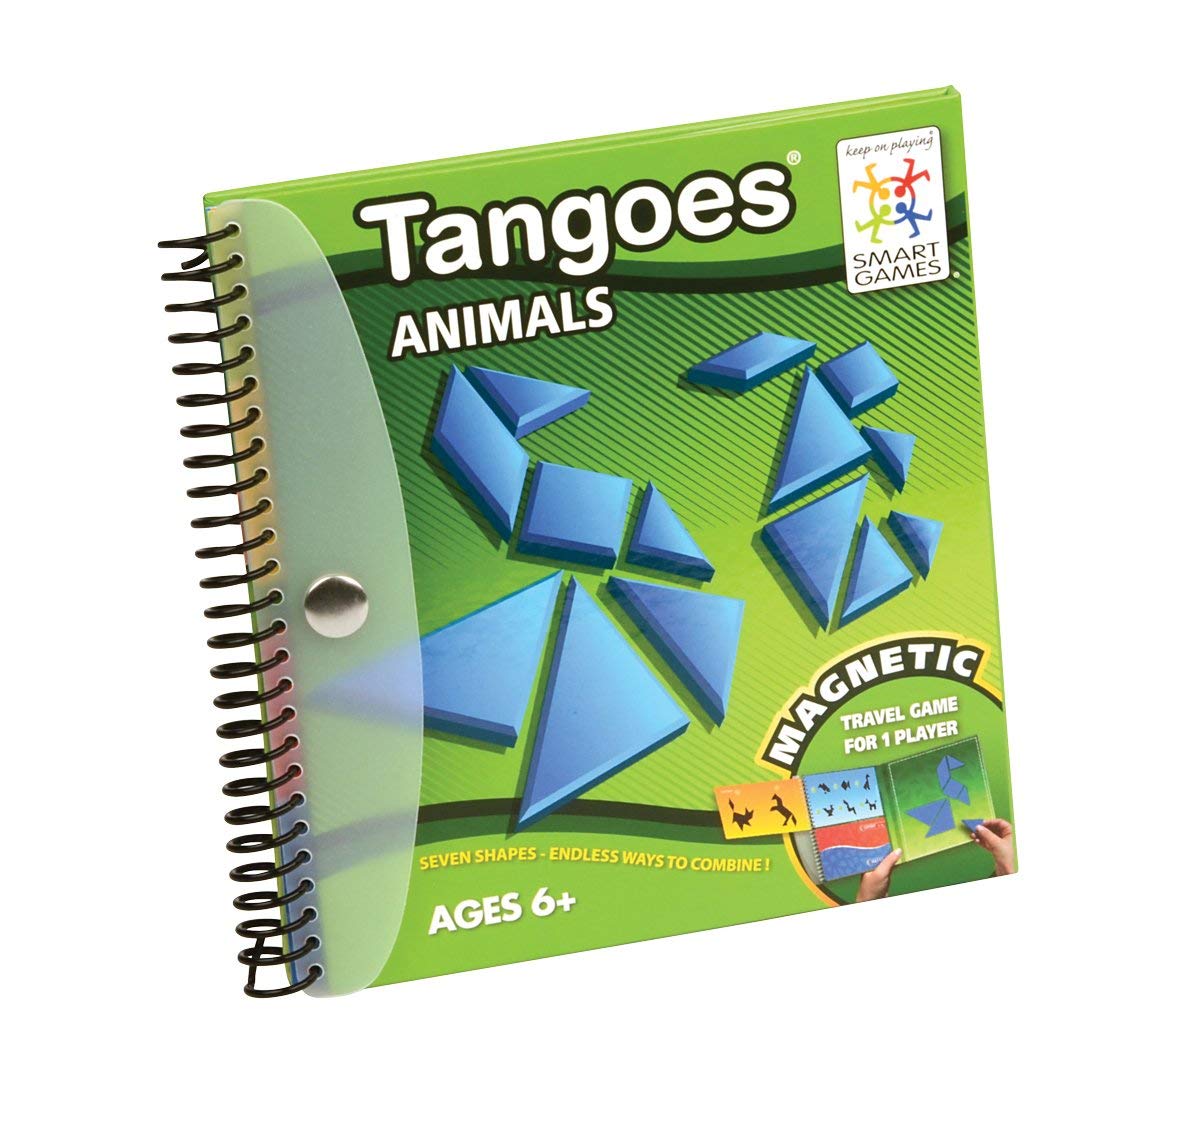 Smart Games Tangoes Animals Magnetic Travel Game For Player